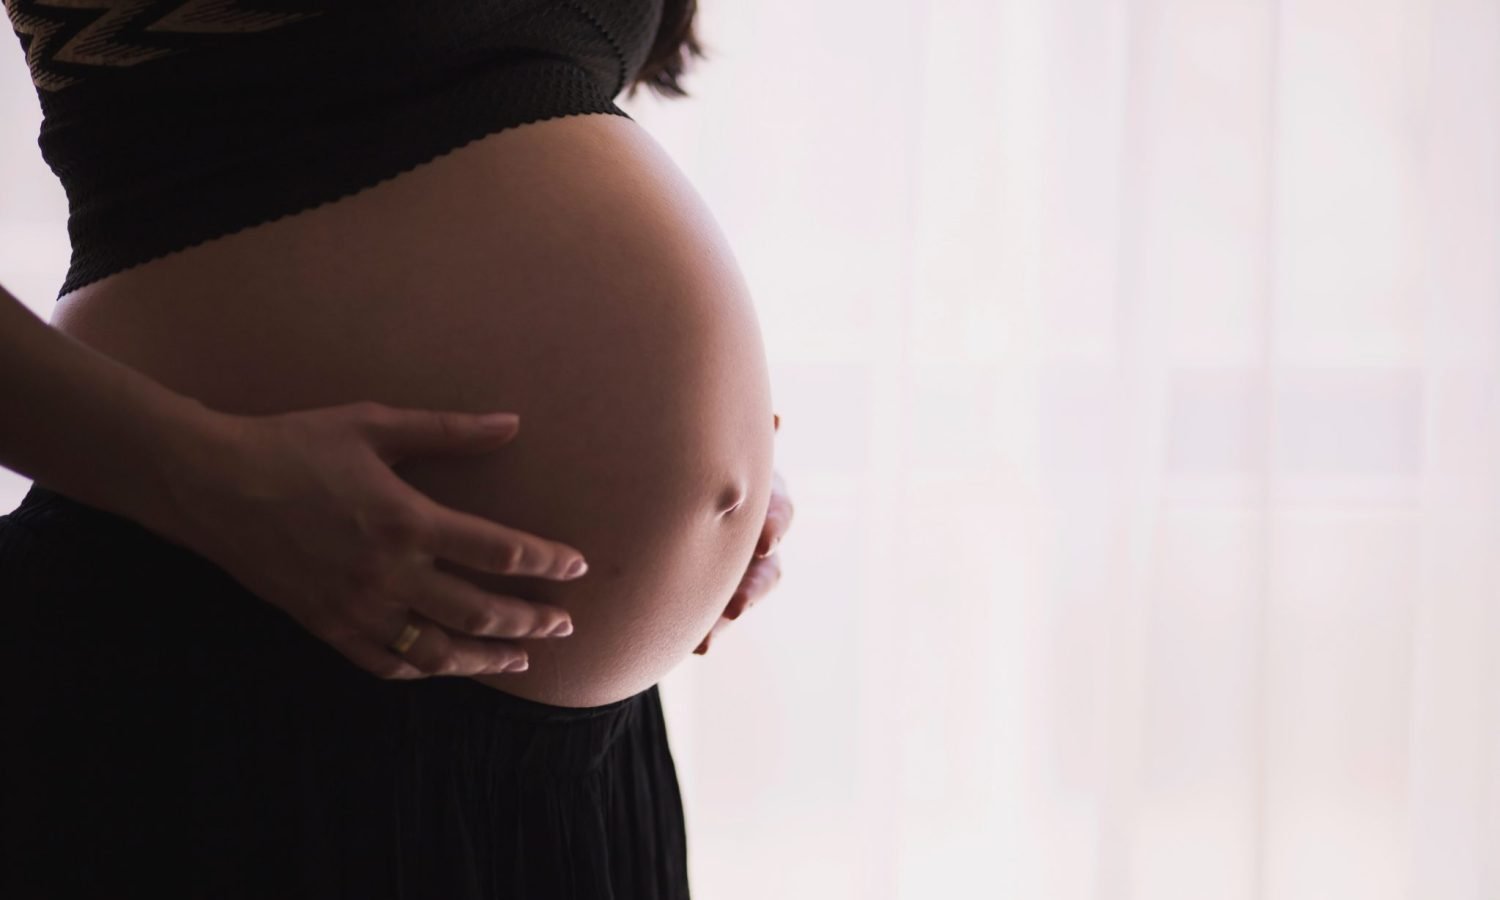 Cannabis Use In Pregnancy Linked With Issues In Childhood